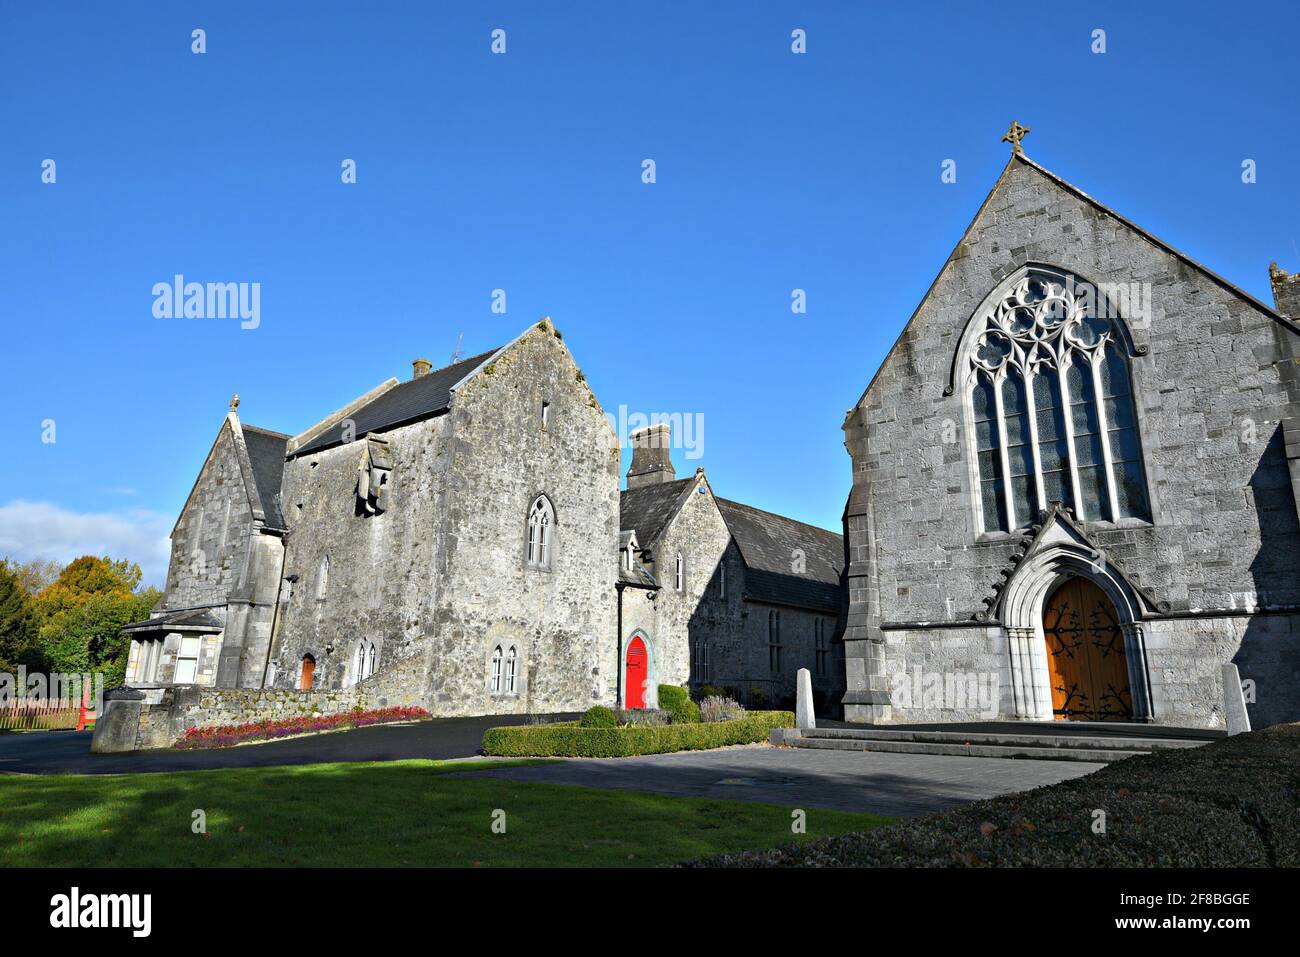 Landscape with scenic view of the Medieval Gothic Revival style Holy Trinity Abbey in Adare, County Limerick Ireland. Stock Photo